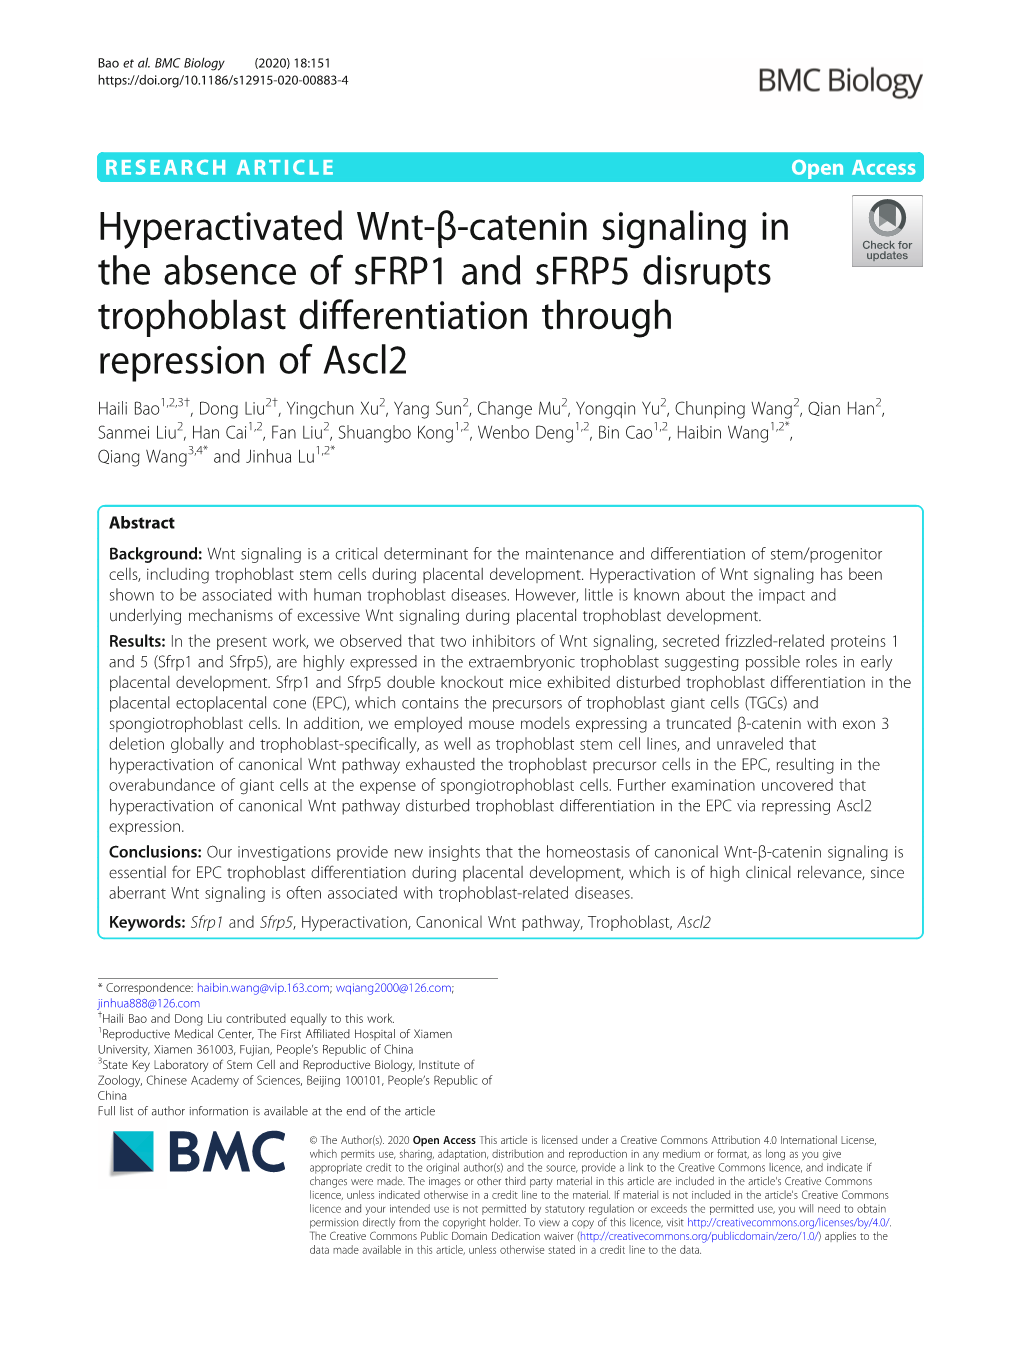 Hyperactivated Wnt-Β-Catenin Signaling in the Absence of Sfrp1 and Sfrp5 Disrupts Trophoblast Differentiation Through Repressio